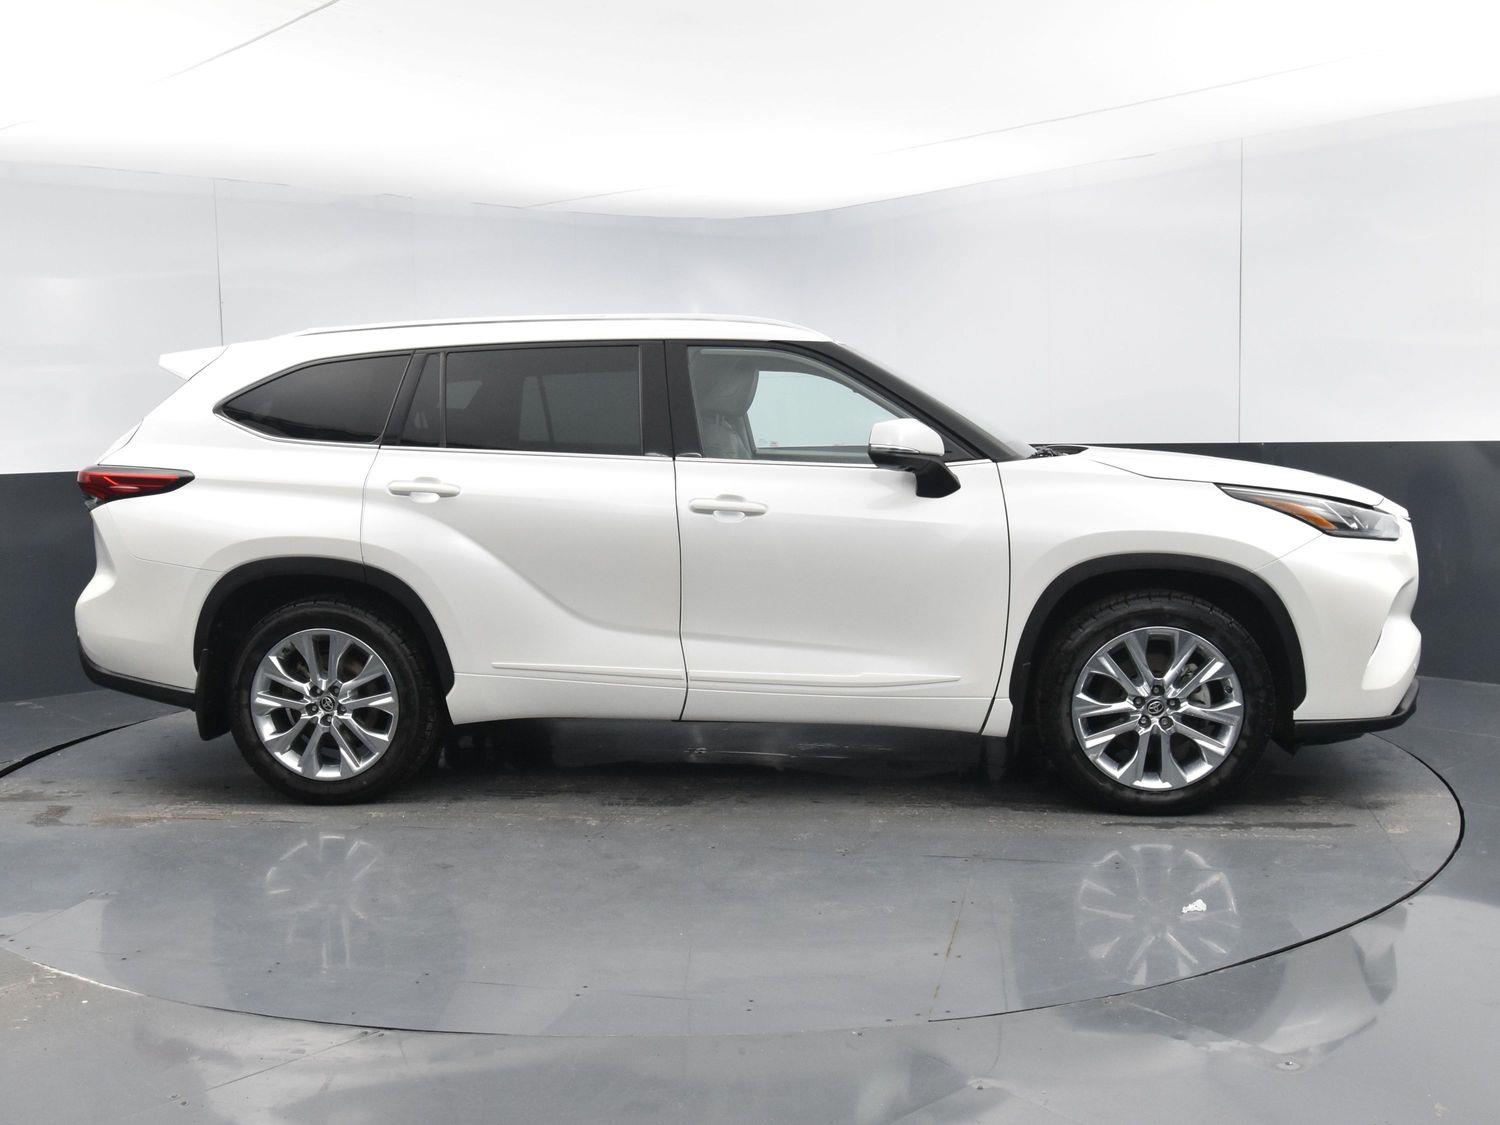 Used 2020 Toyota Highlander Limited Sport Utility for sale in Grand Island NE